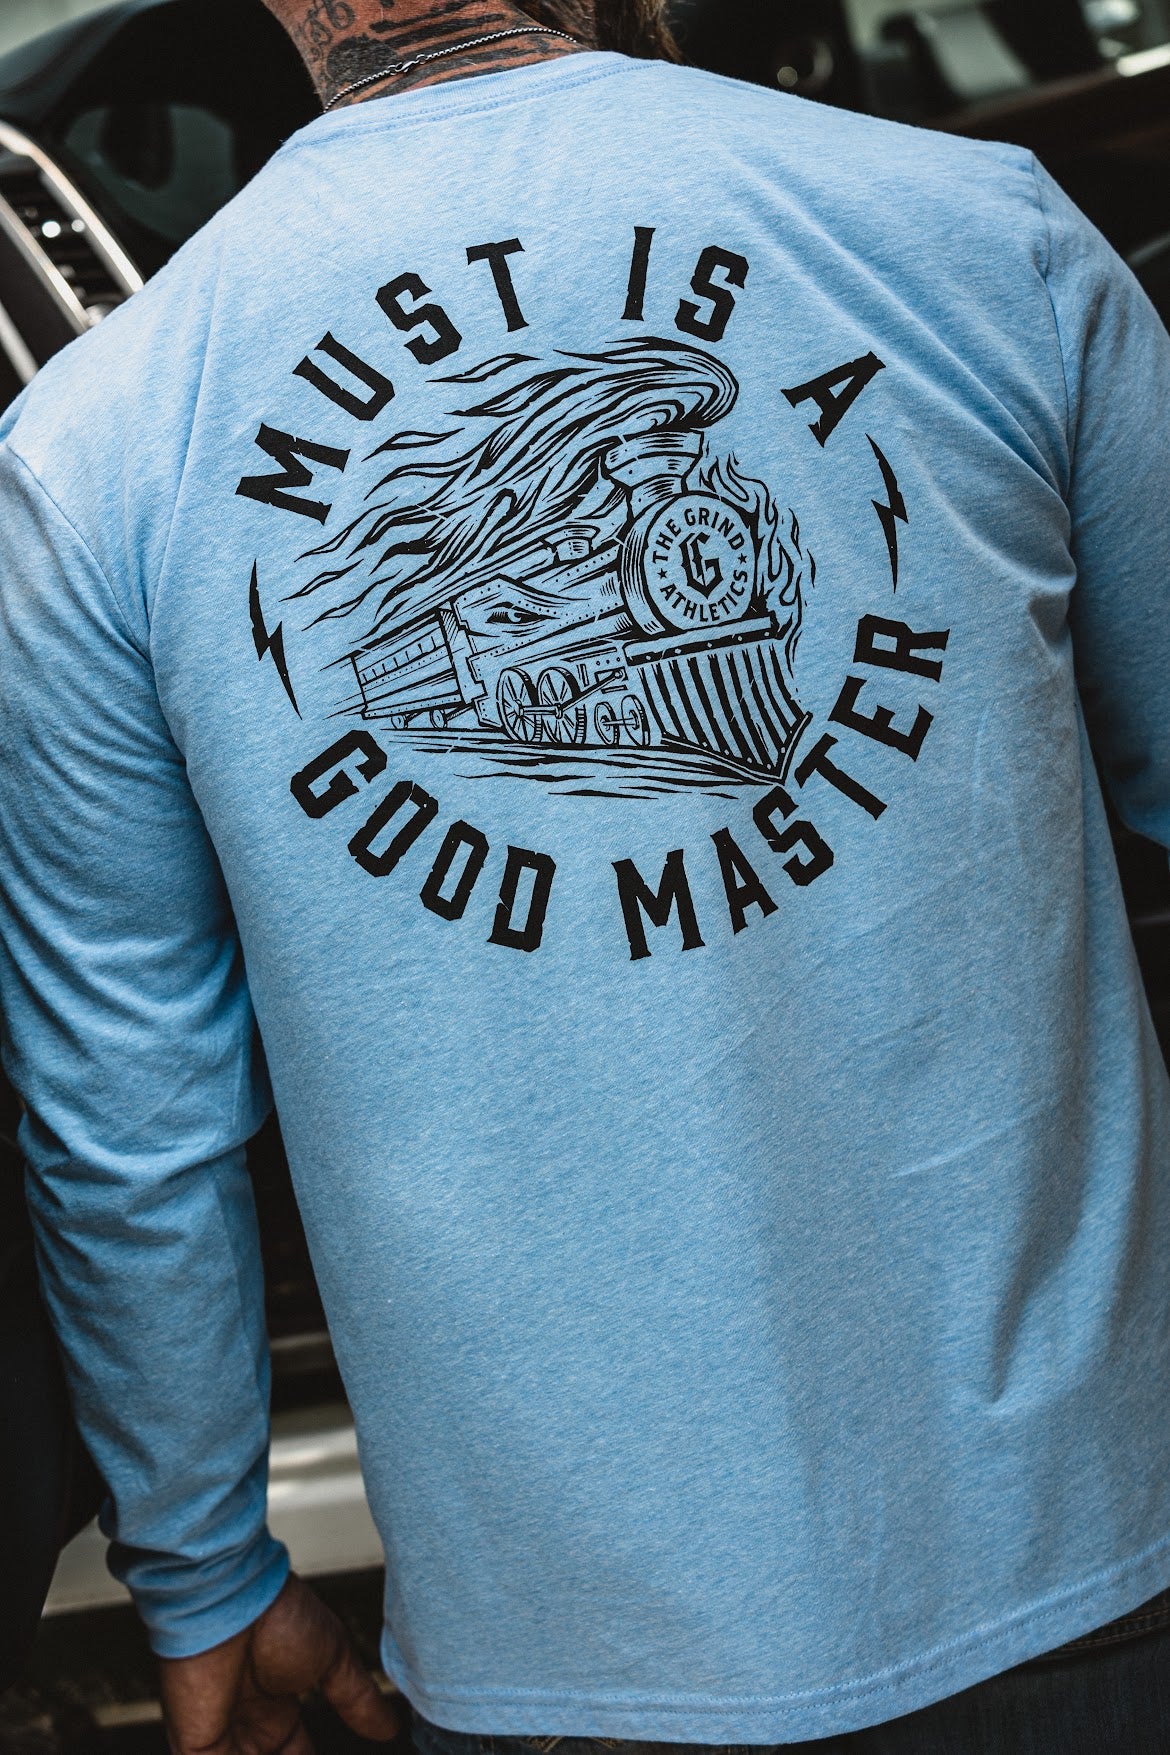 The Grind Athletics Must is a Good Master - Long Sleeve T